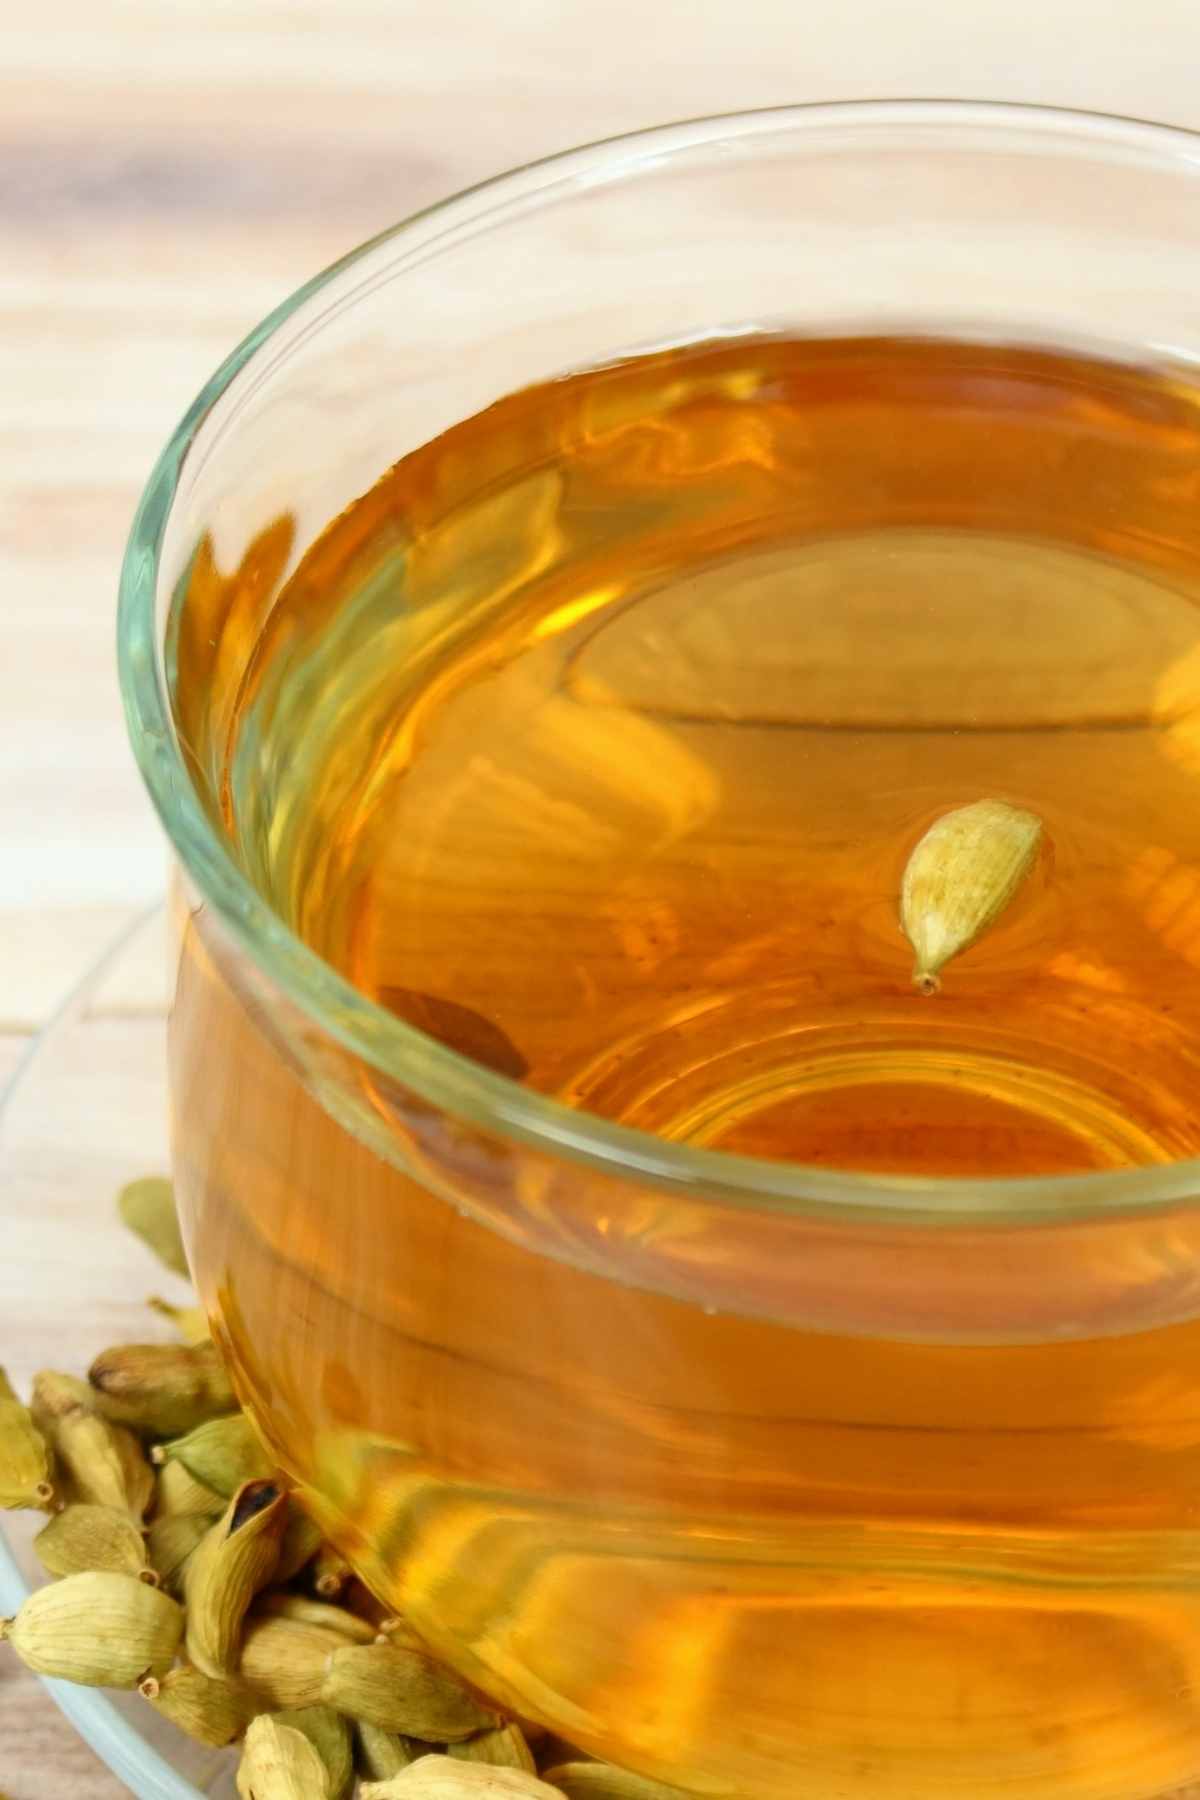 Cardamom is a flavorful spice that’s used to add flavor to a variety of dishes. One of the easiest ways to enjoy cardamom is in hot tea. This tea has a pleasant spicy flavor that’s a delicious blend of cardamom, clove, and ginger.